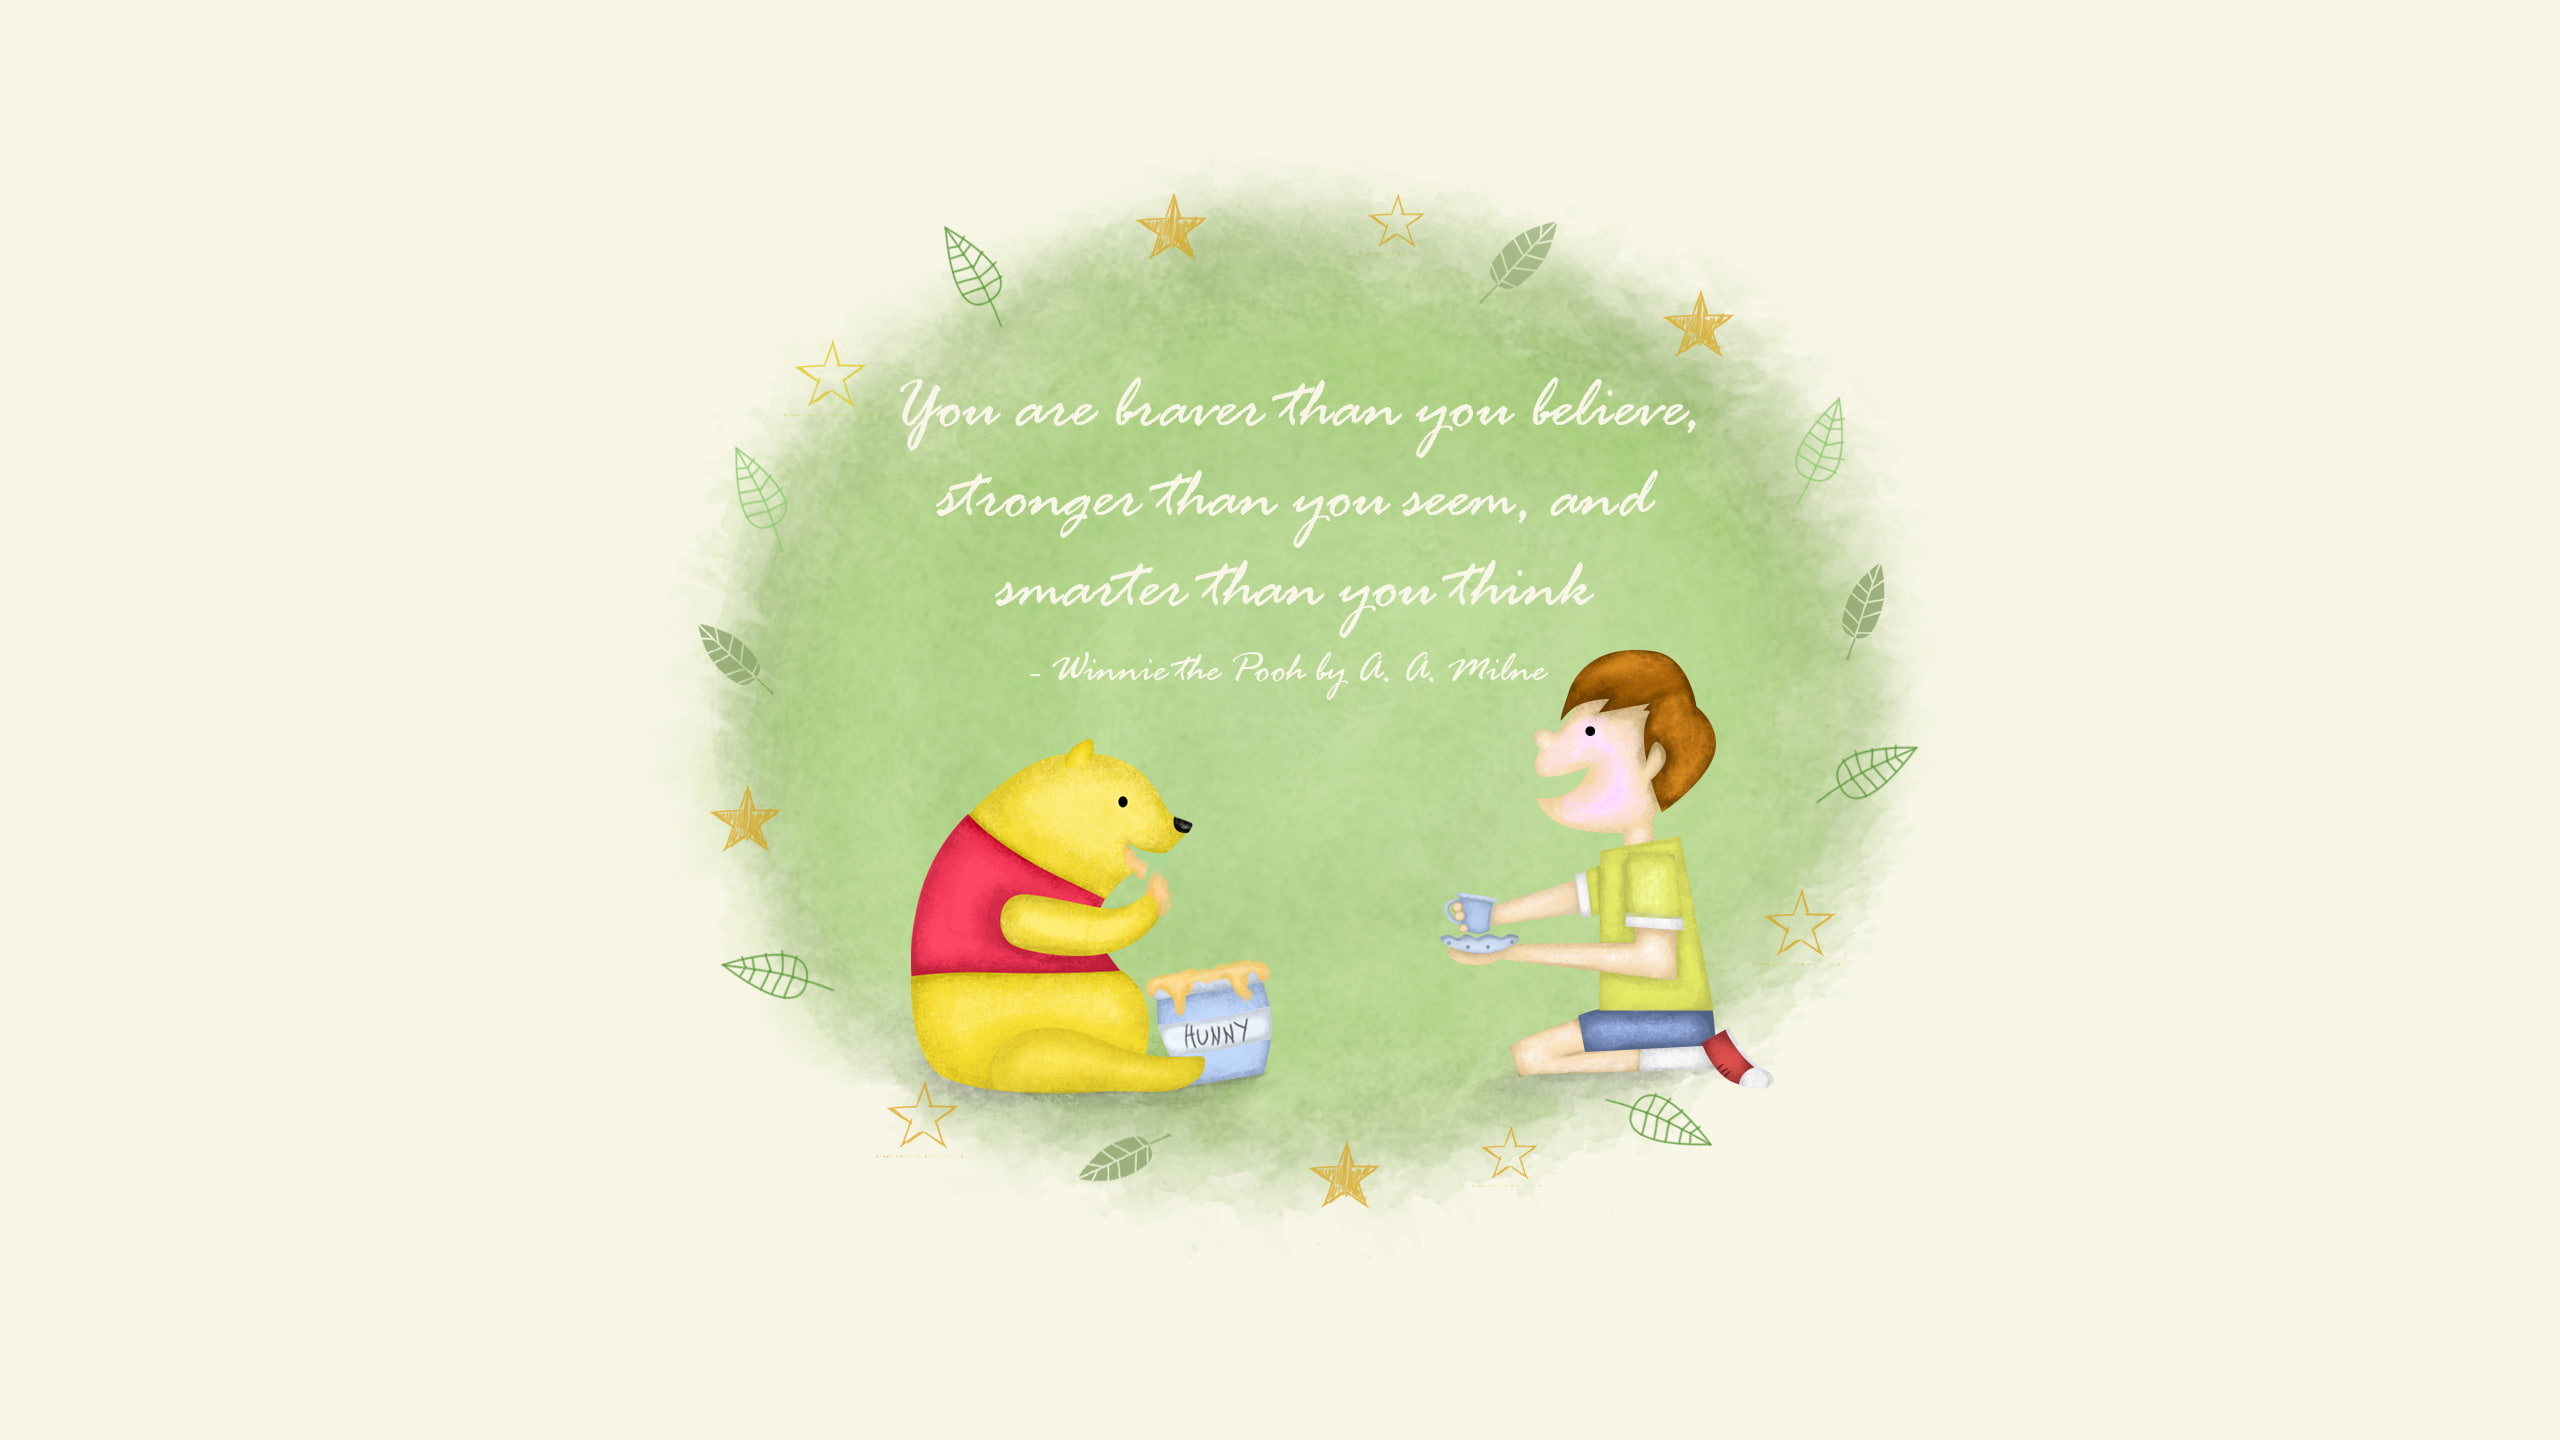 Braver, Stronger, Popular quotes, Winnie the Pooh, Smarter